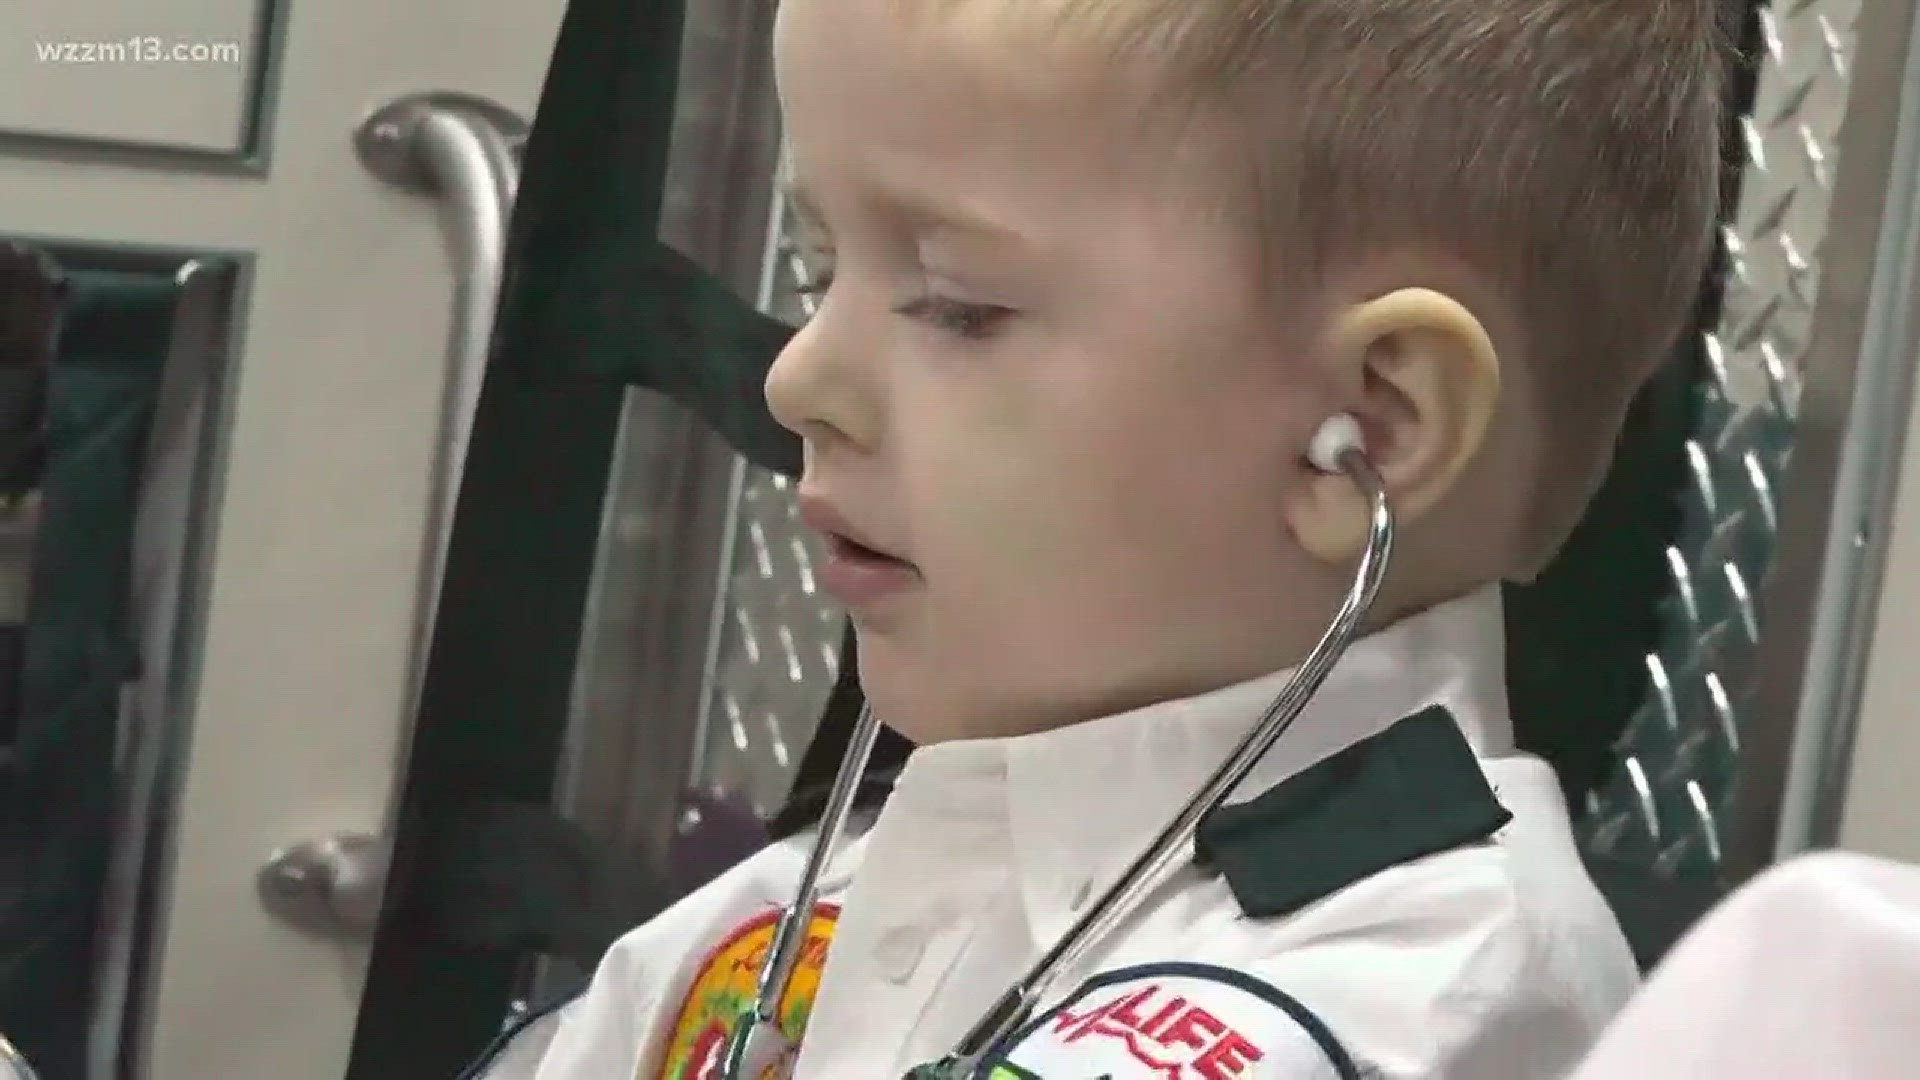 A four-year-old launched his career as an EMT.